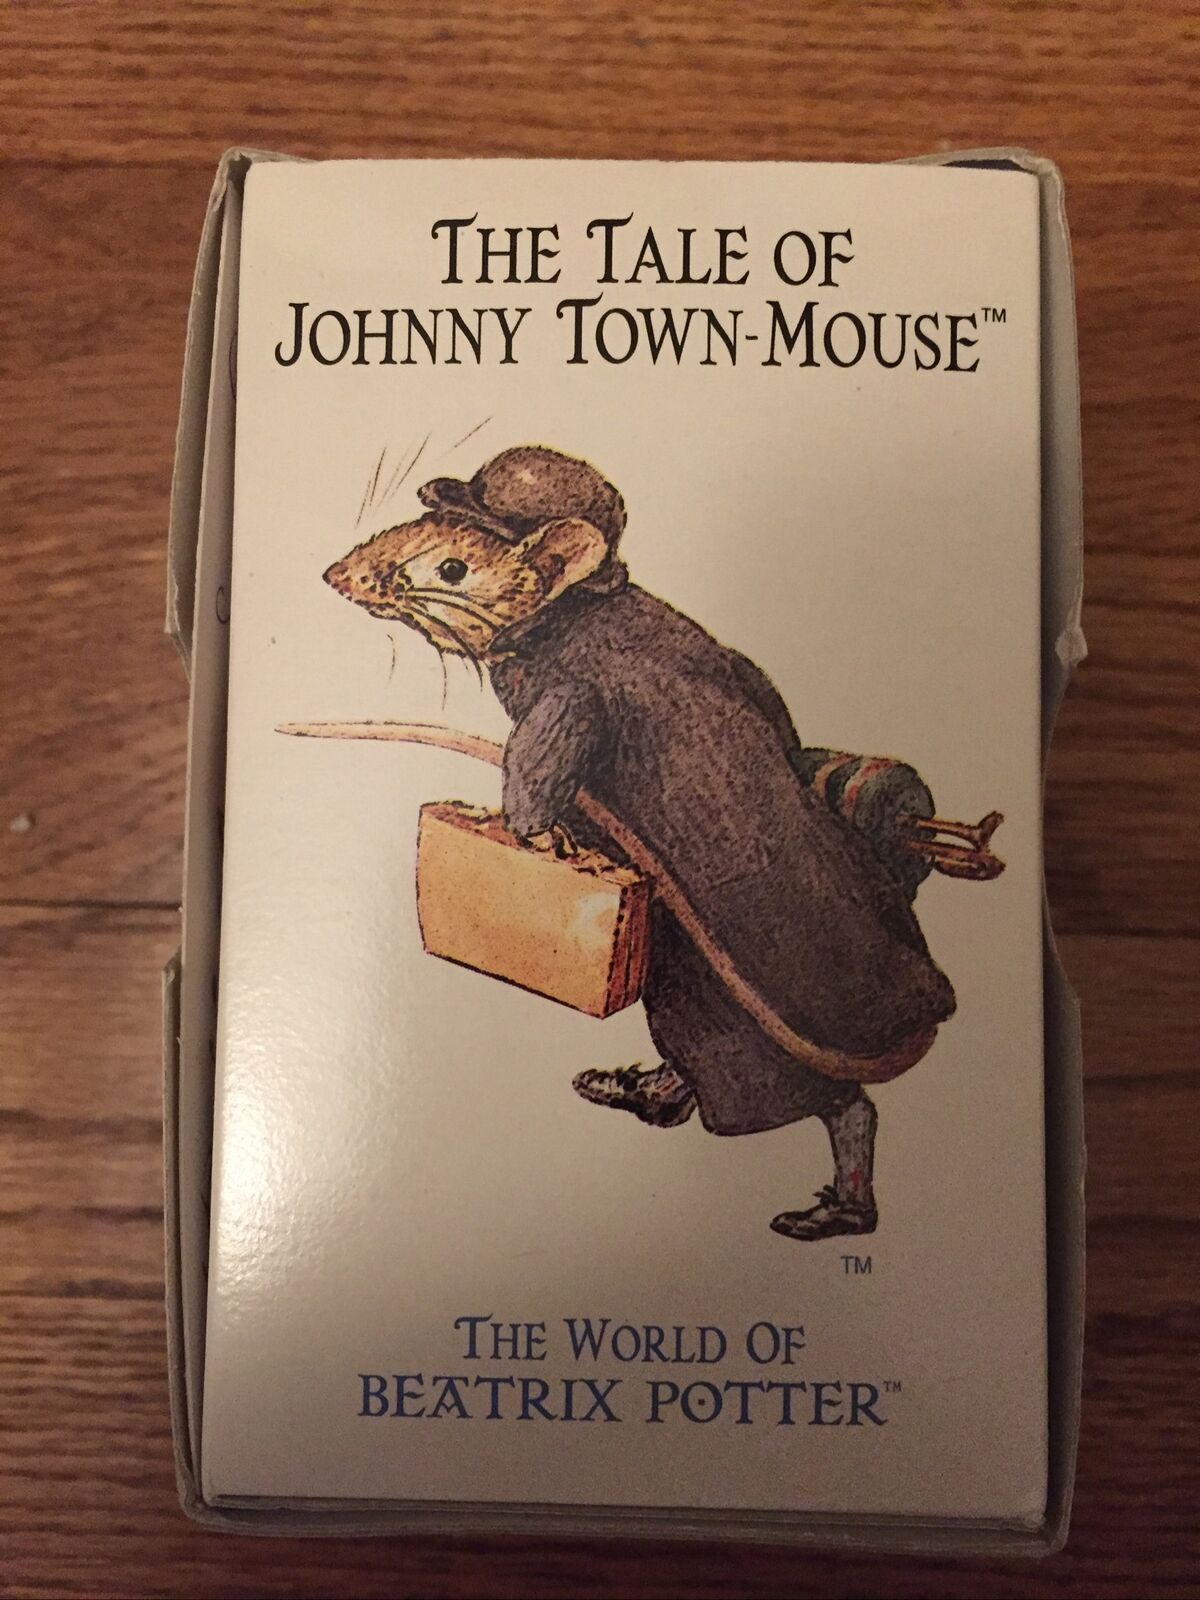 Johnny Town-Mouse With Bag Beatrix Potter Figurine 1988 Copyright